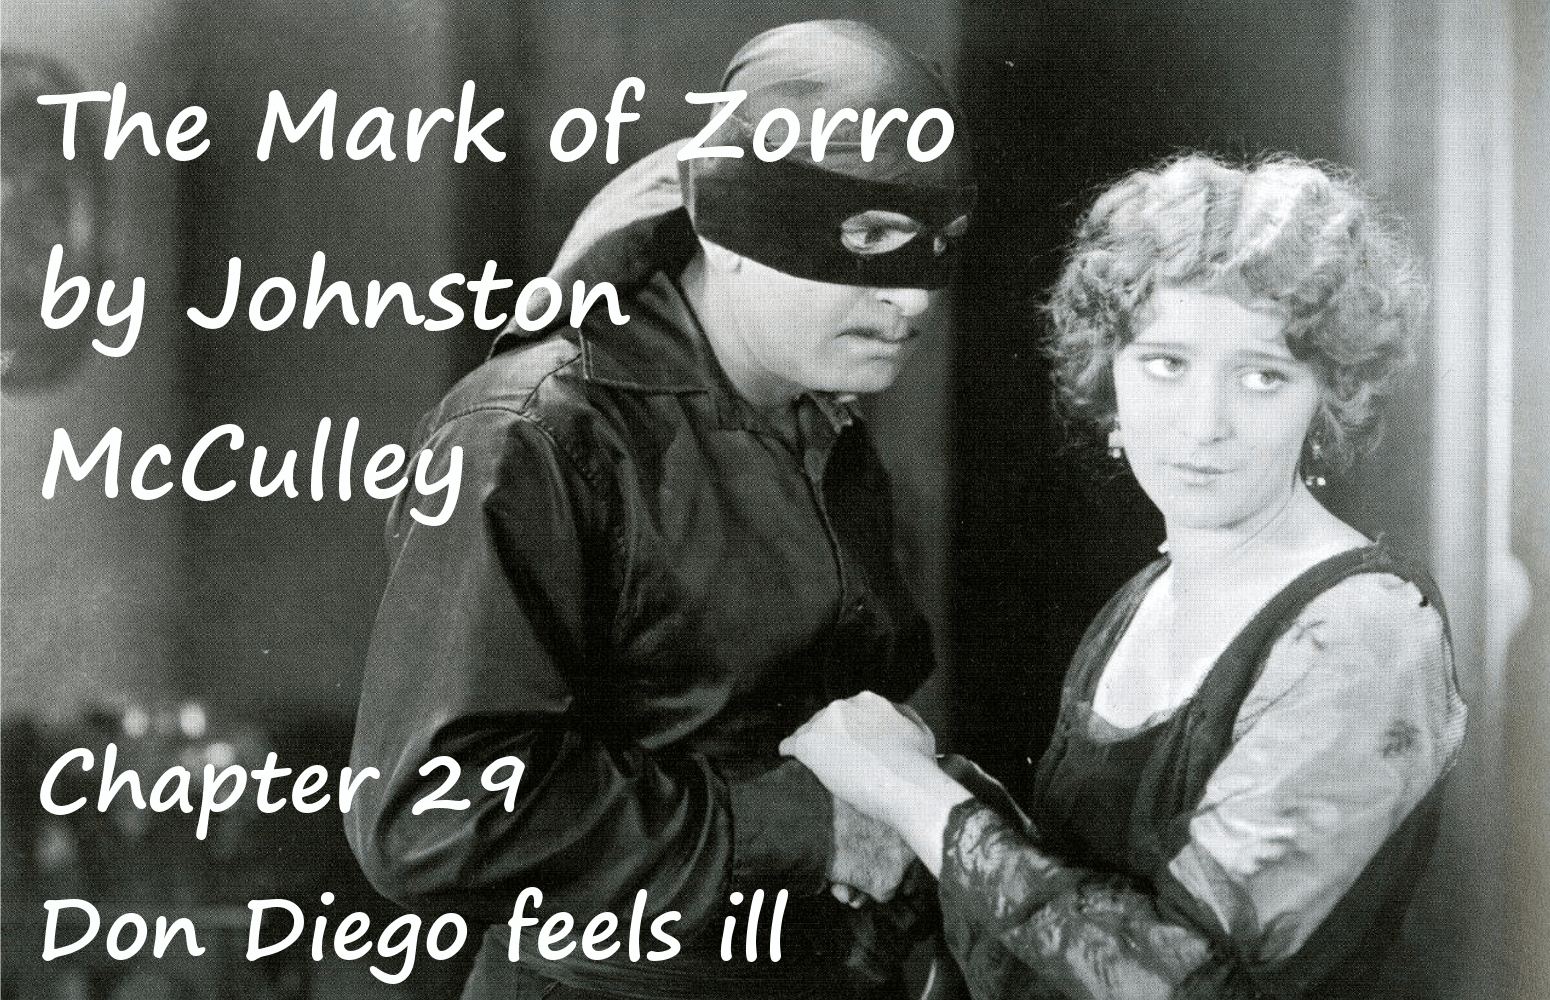 The Mark of Zorro chapter 29 Don Diego feels ill by Johnston McCulley